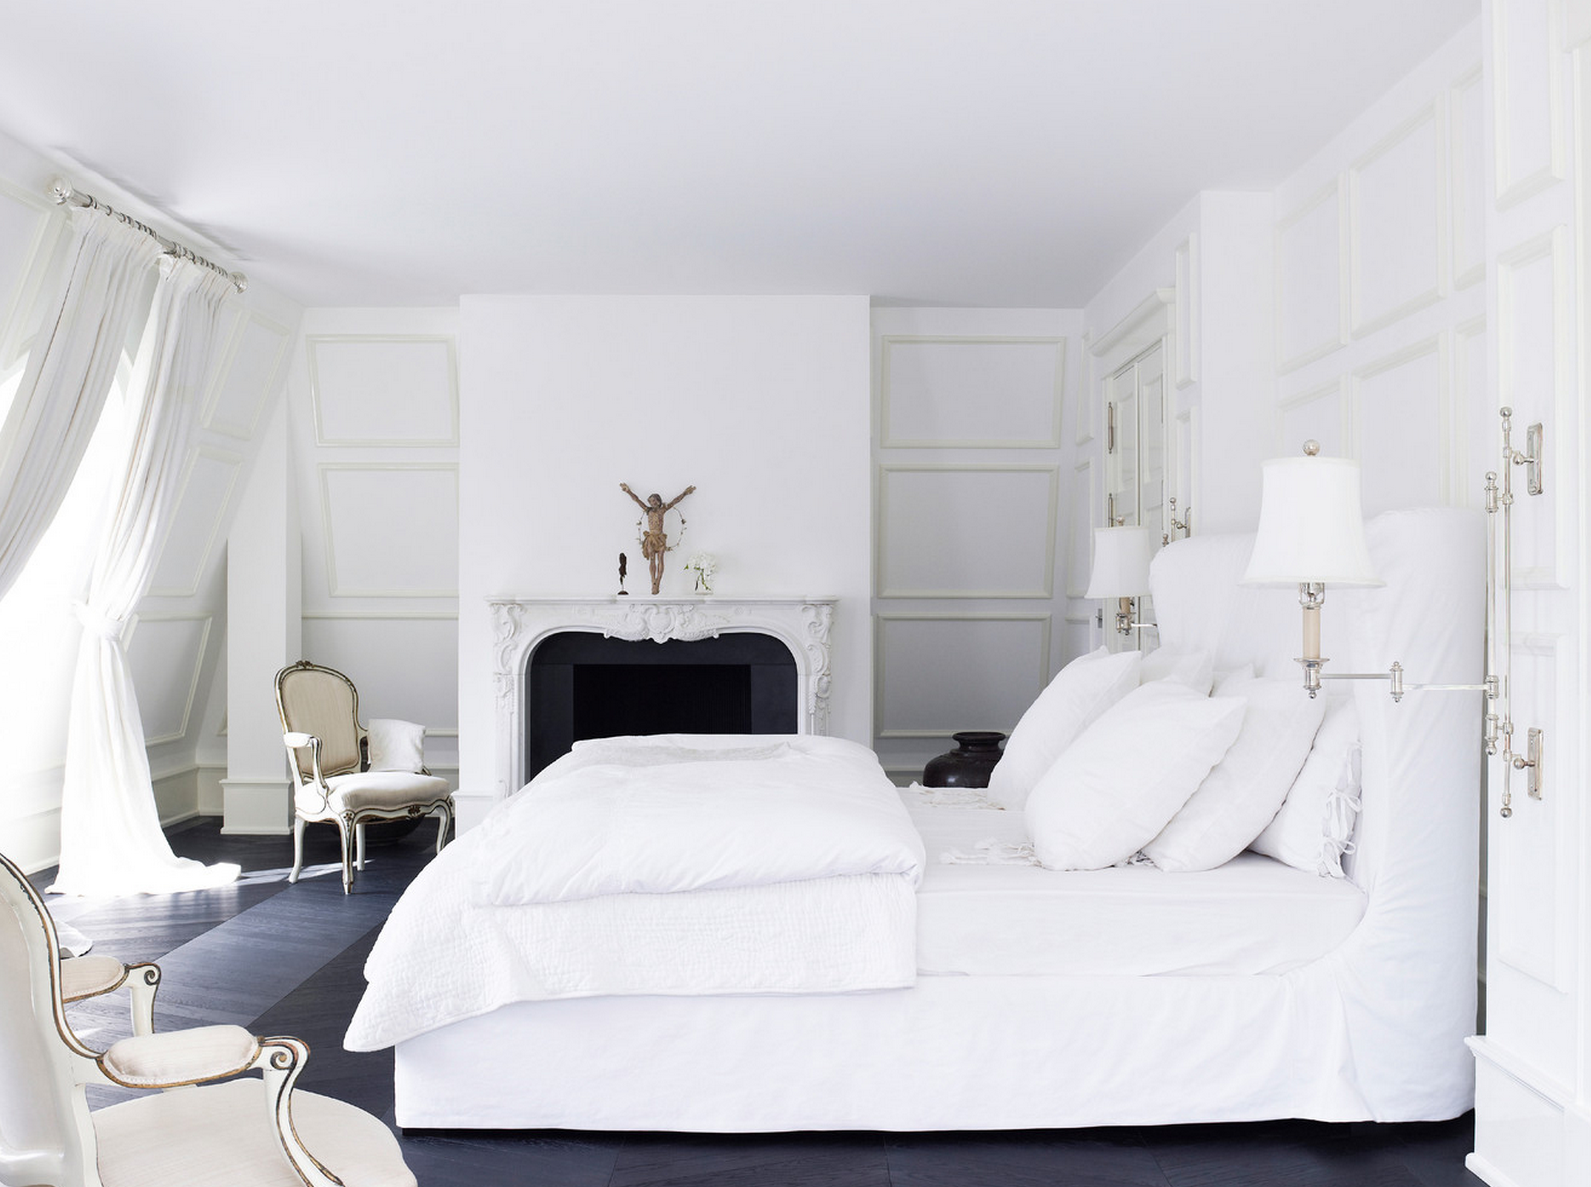 A White Bedroom With A Statement Piece Such As A Chandelier Or A Canopy Bed